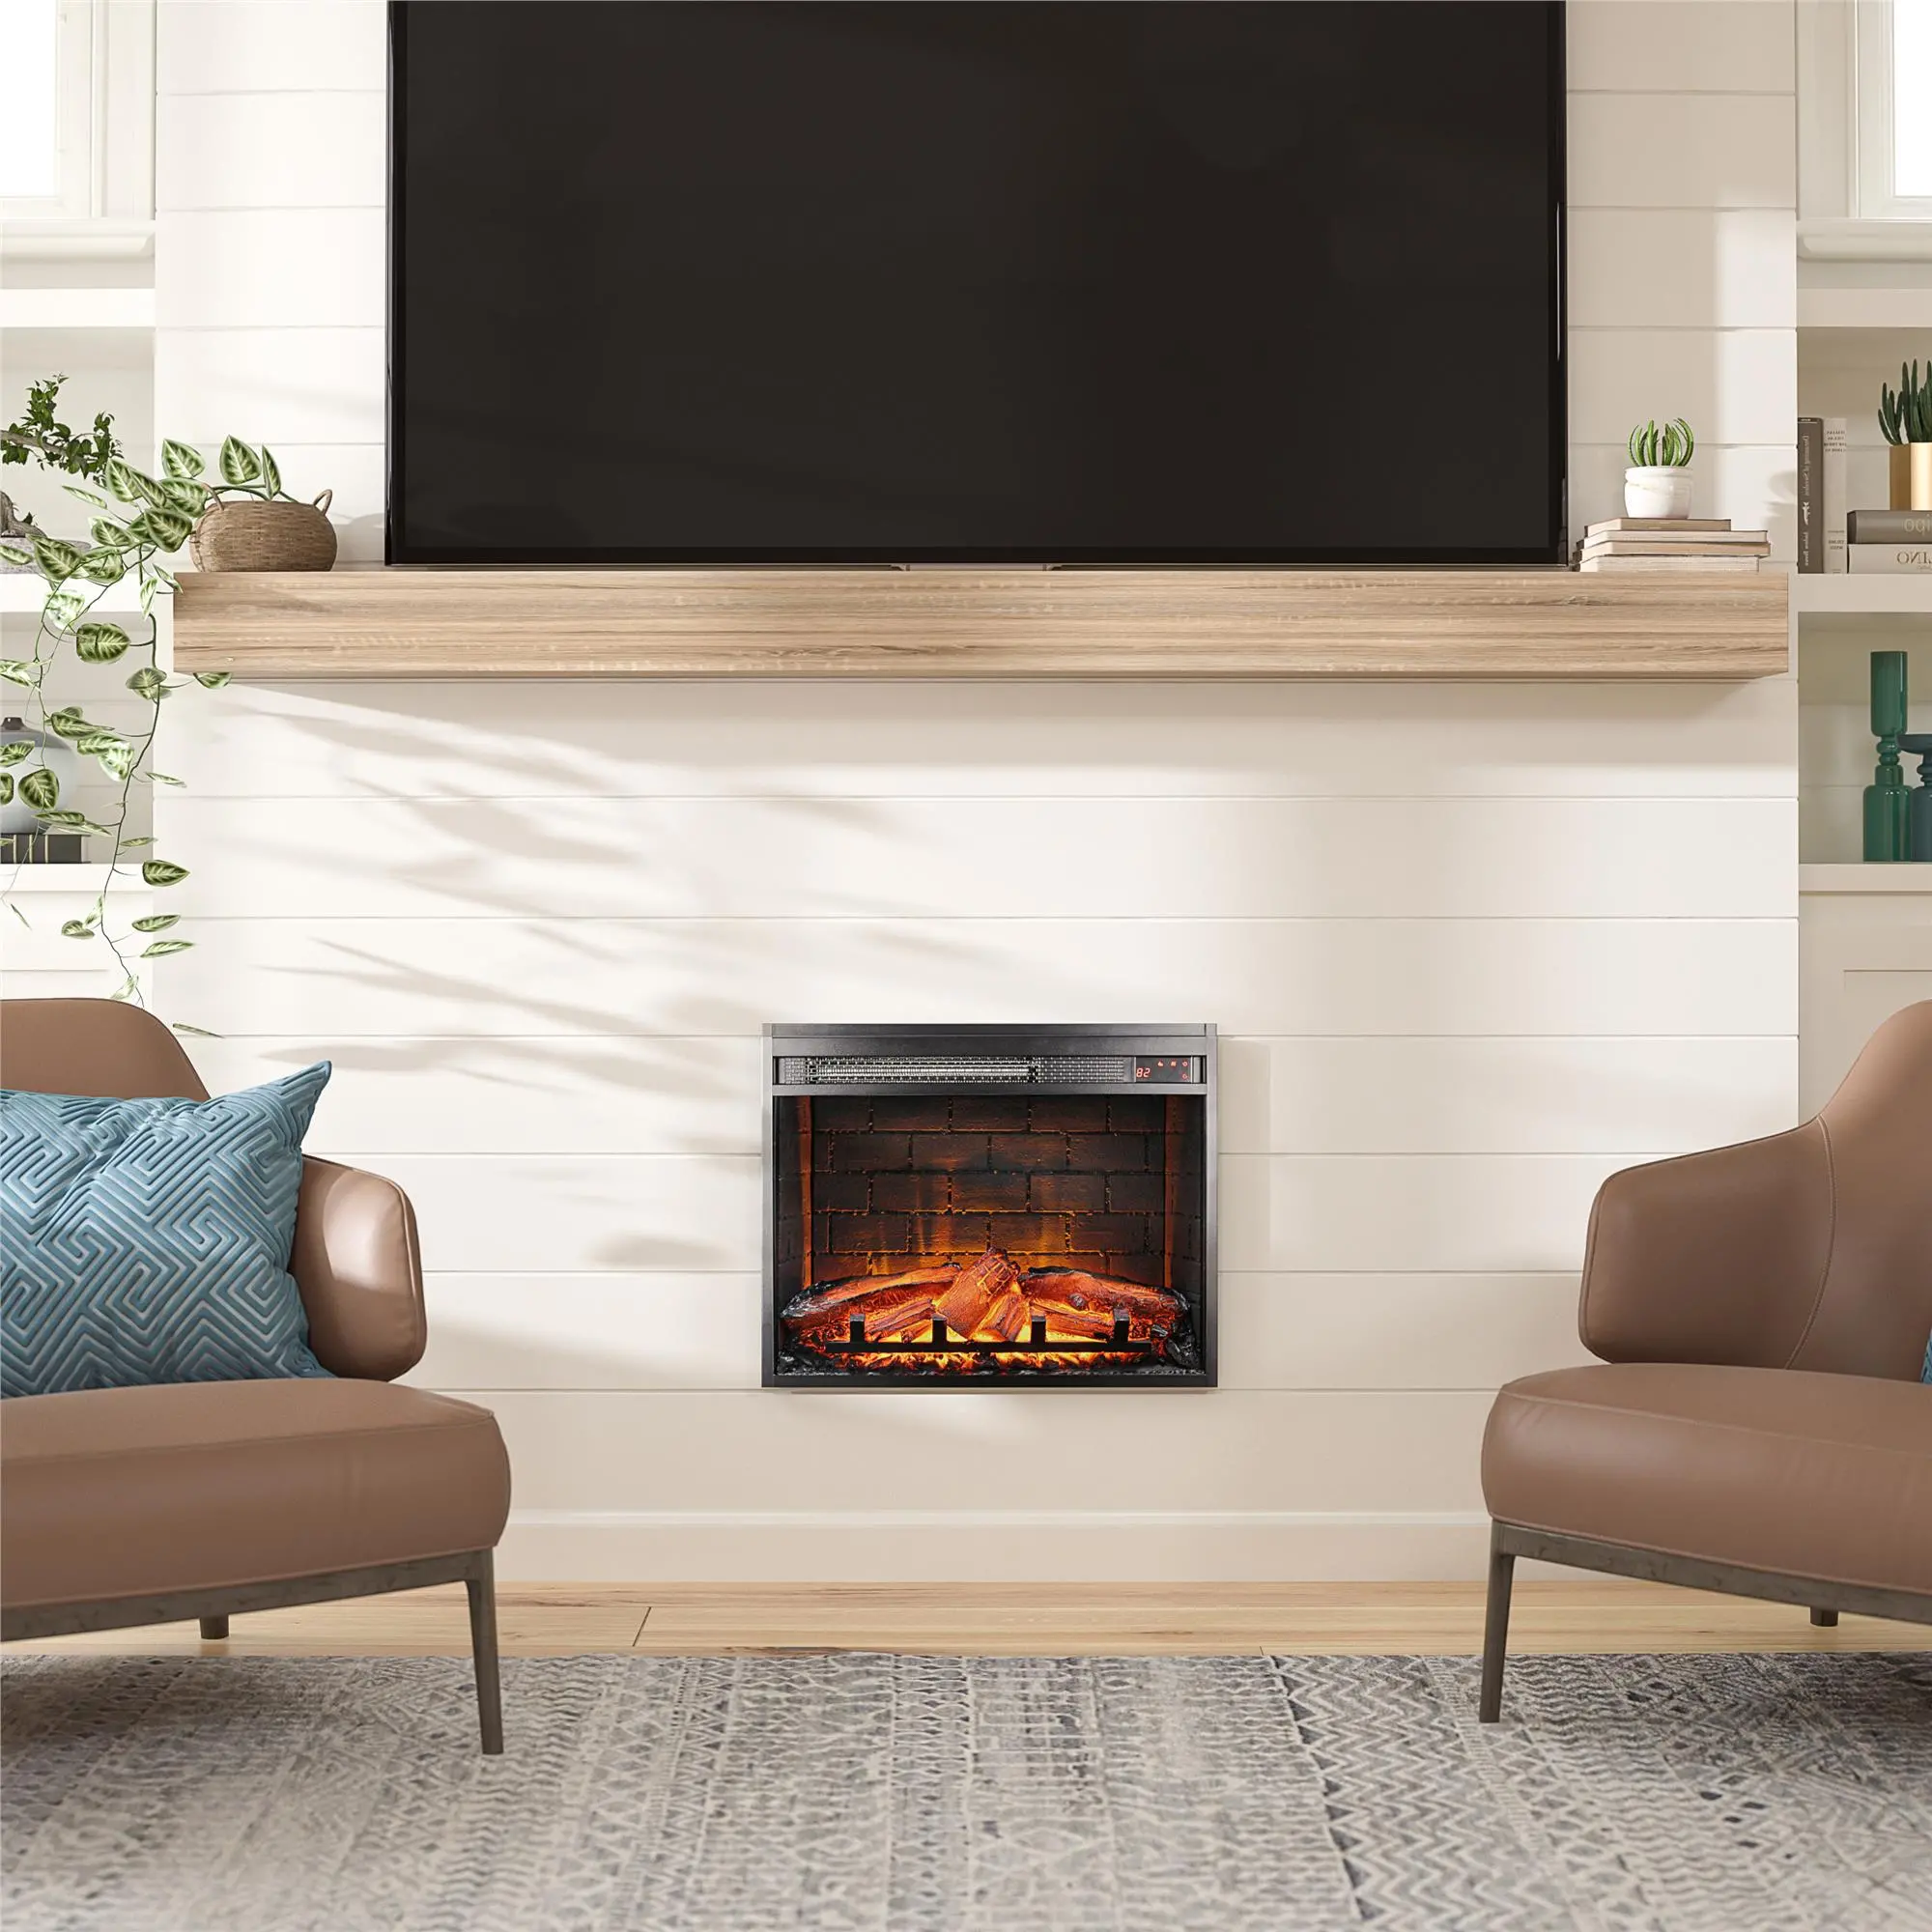 Altra Flame Black 23 Electric Glass Front Fireplace Insert...